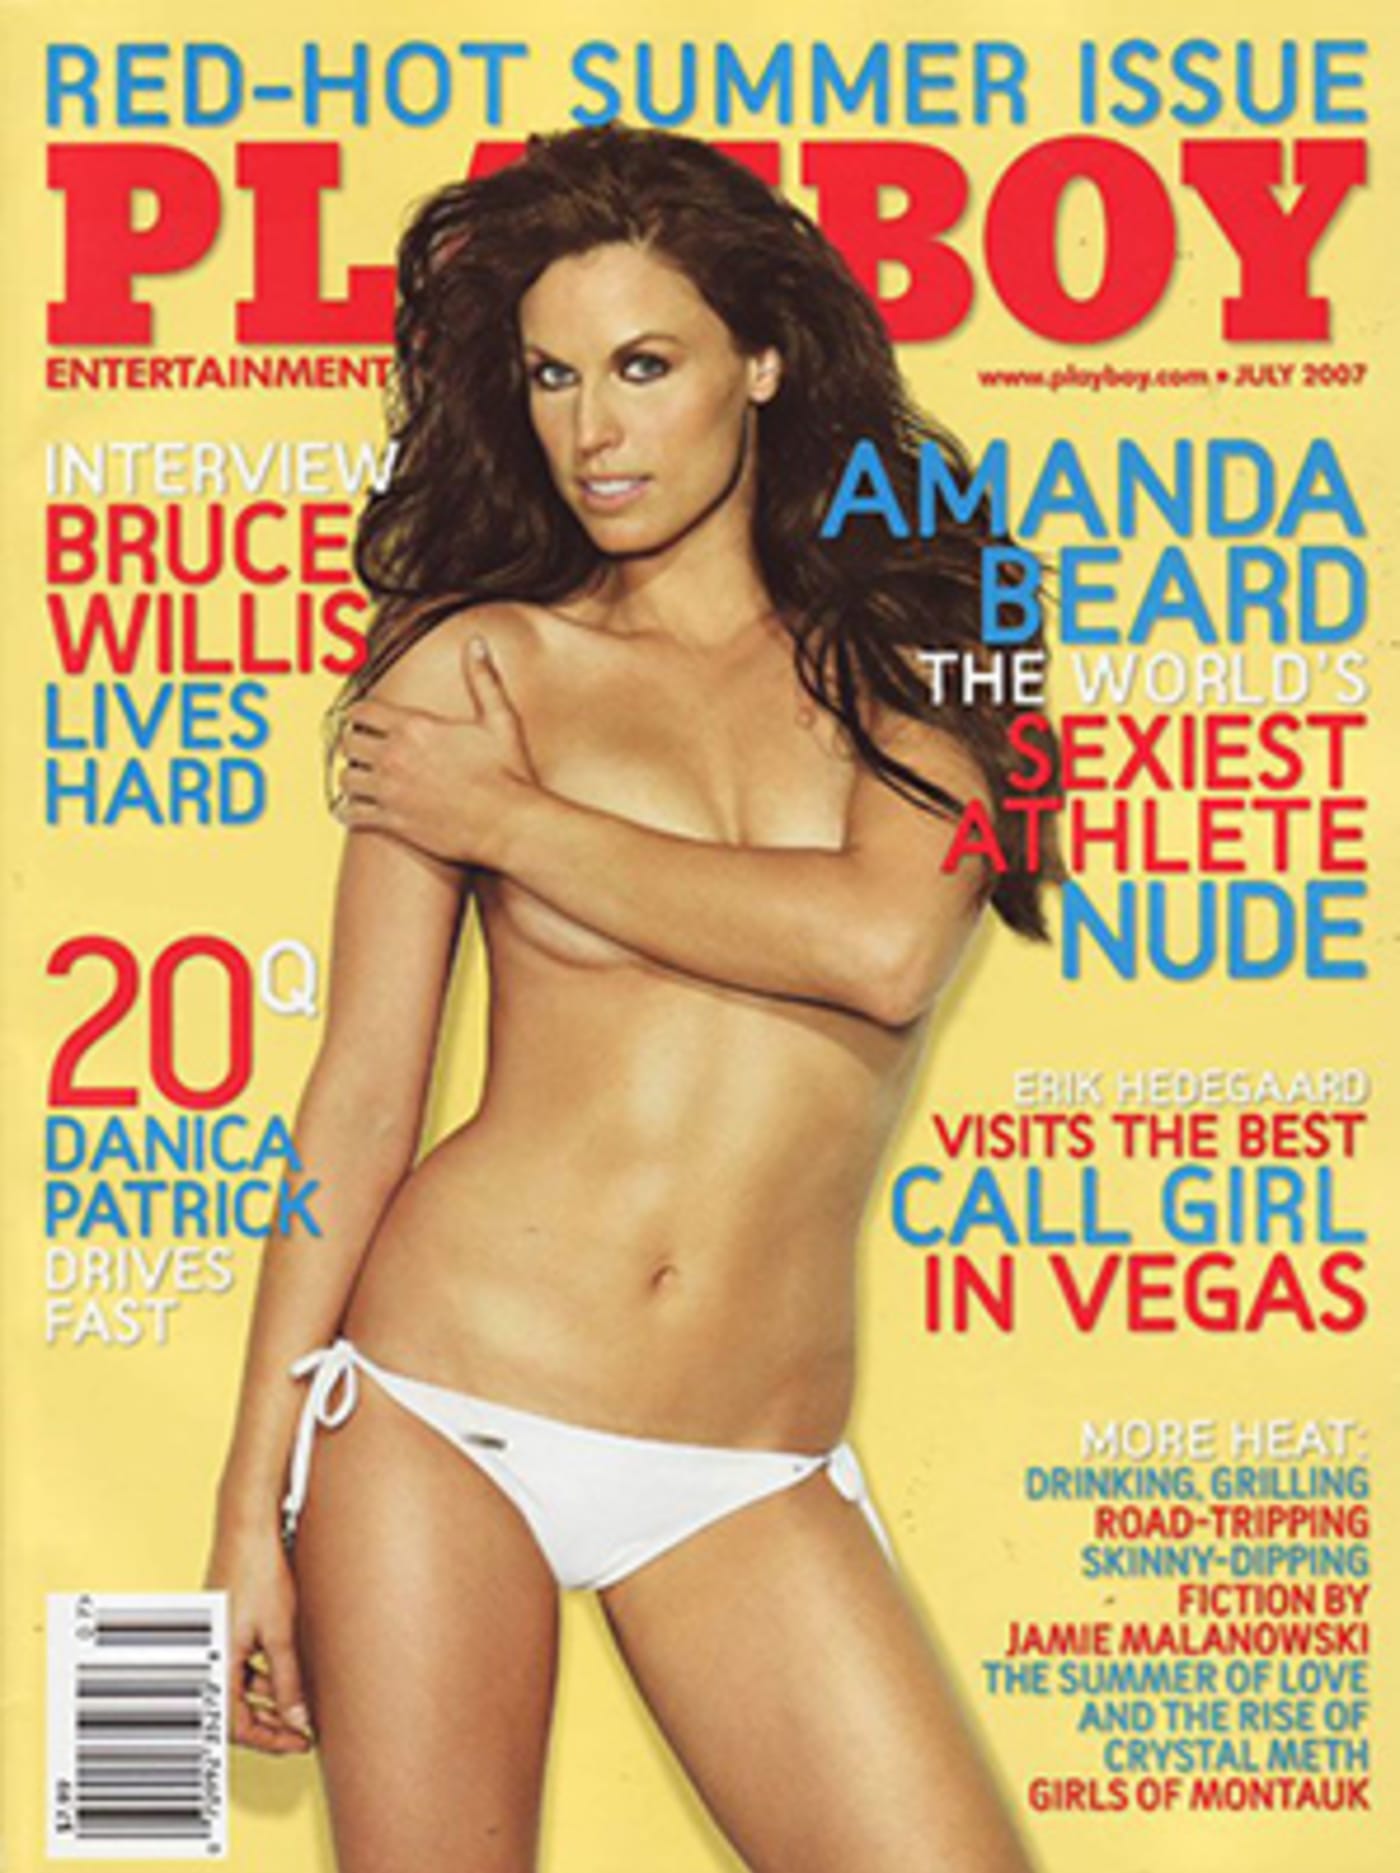 Old Nude Celebs - Playboy Nudes By The Hottest Celebrities: 50 Celebrities Who Posed Naked  For The Magazine | Complex